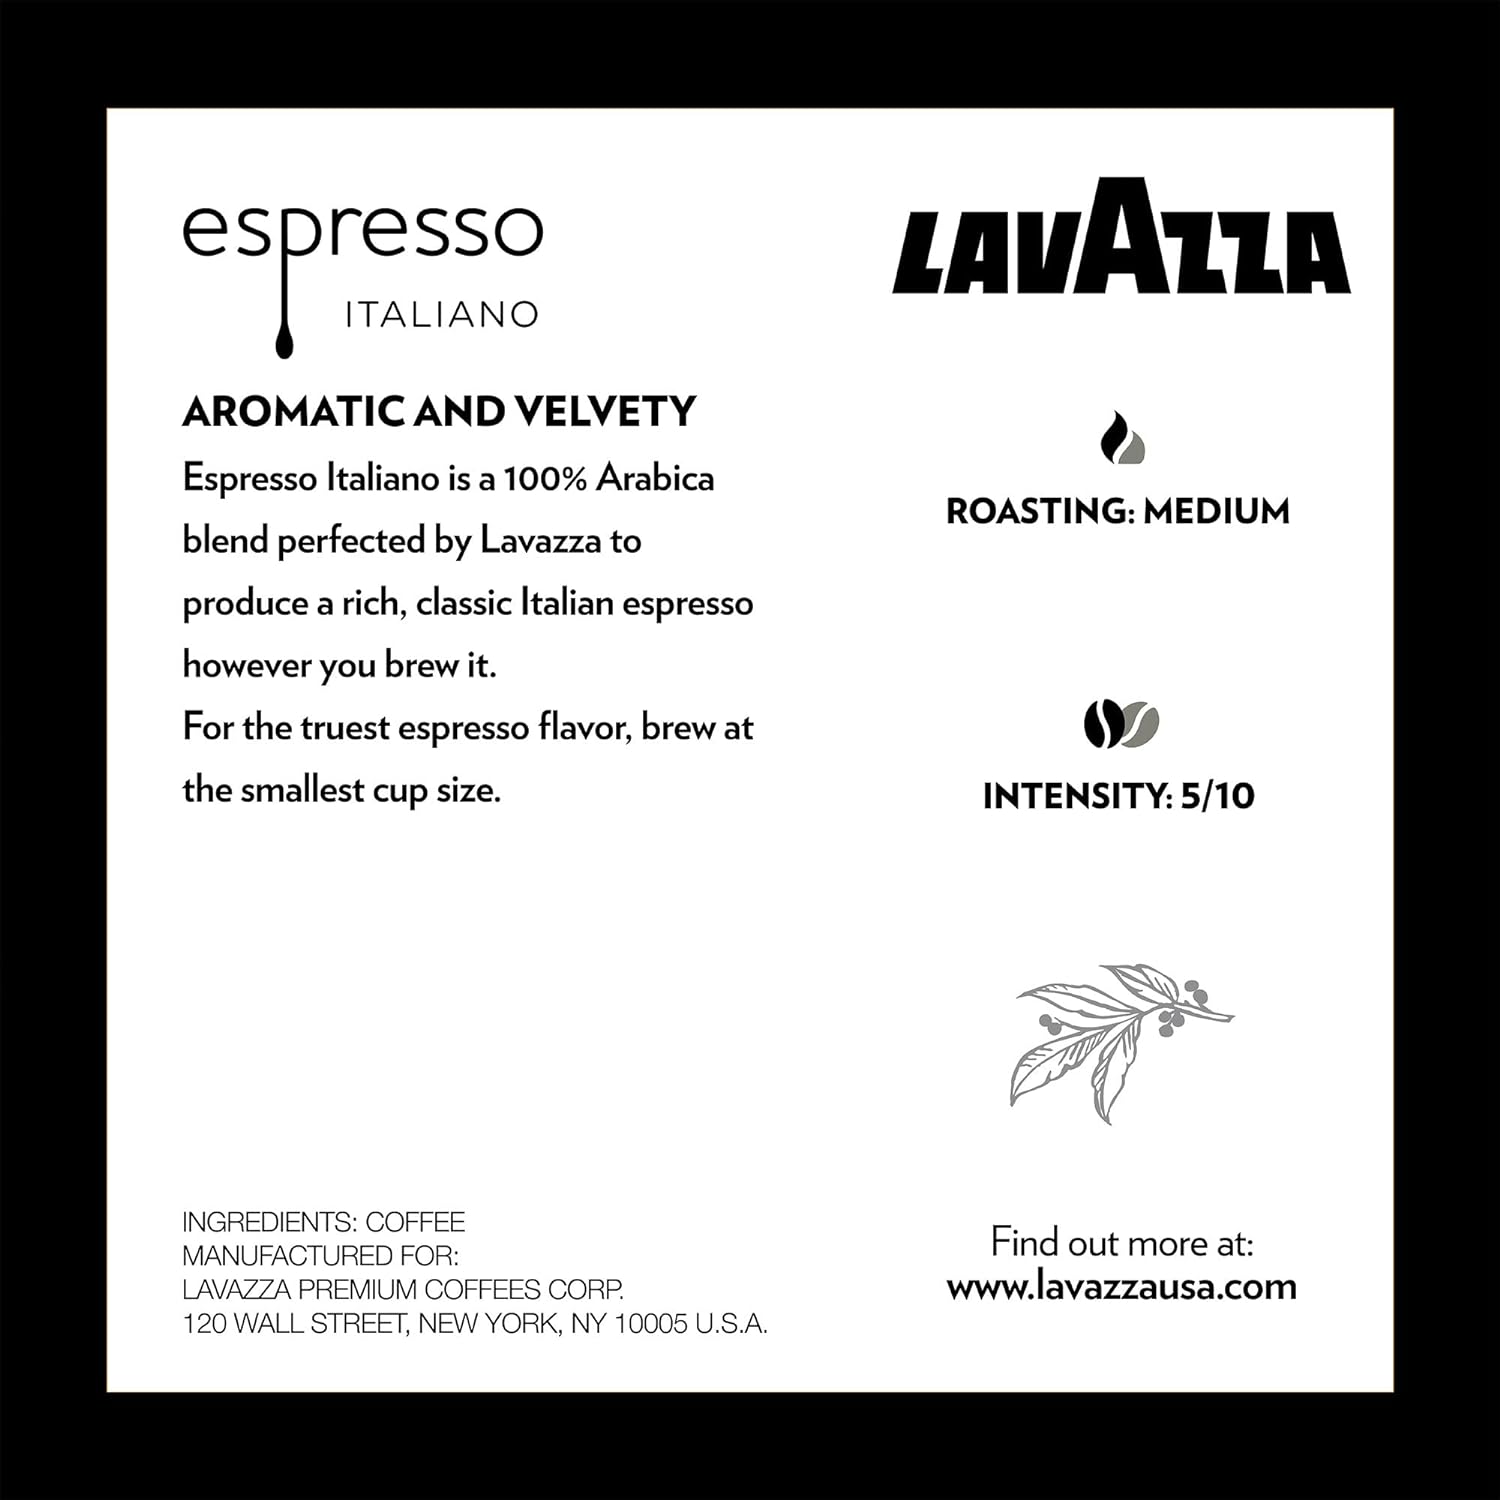 Lavazza Espresso Italiano Single-Serve Coffee K-Cups for Keurig Brewer, Medium Roast, 100% Arabica, Value Pack, 10 Count (Pack of 6) : Grocery & Gourmet Food